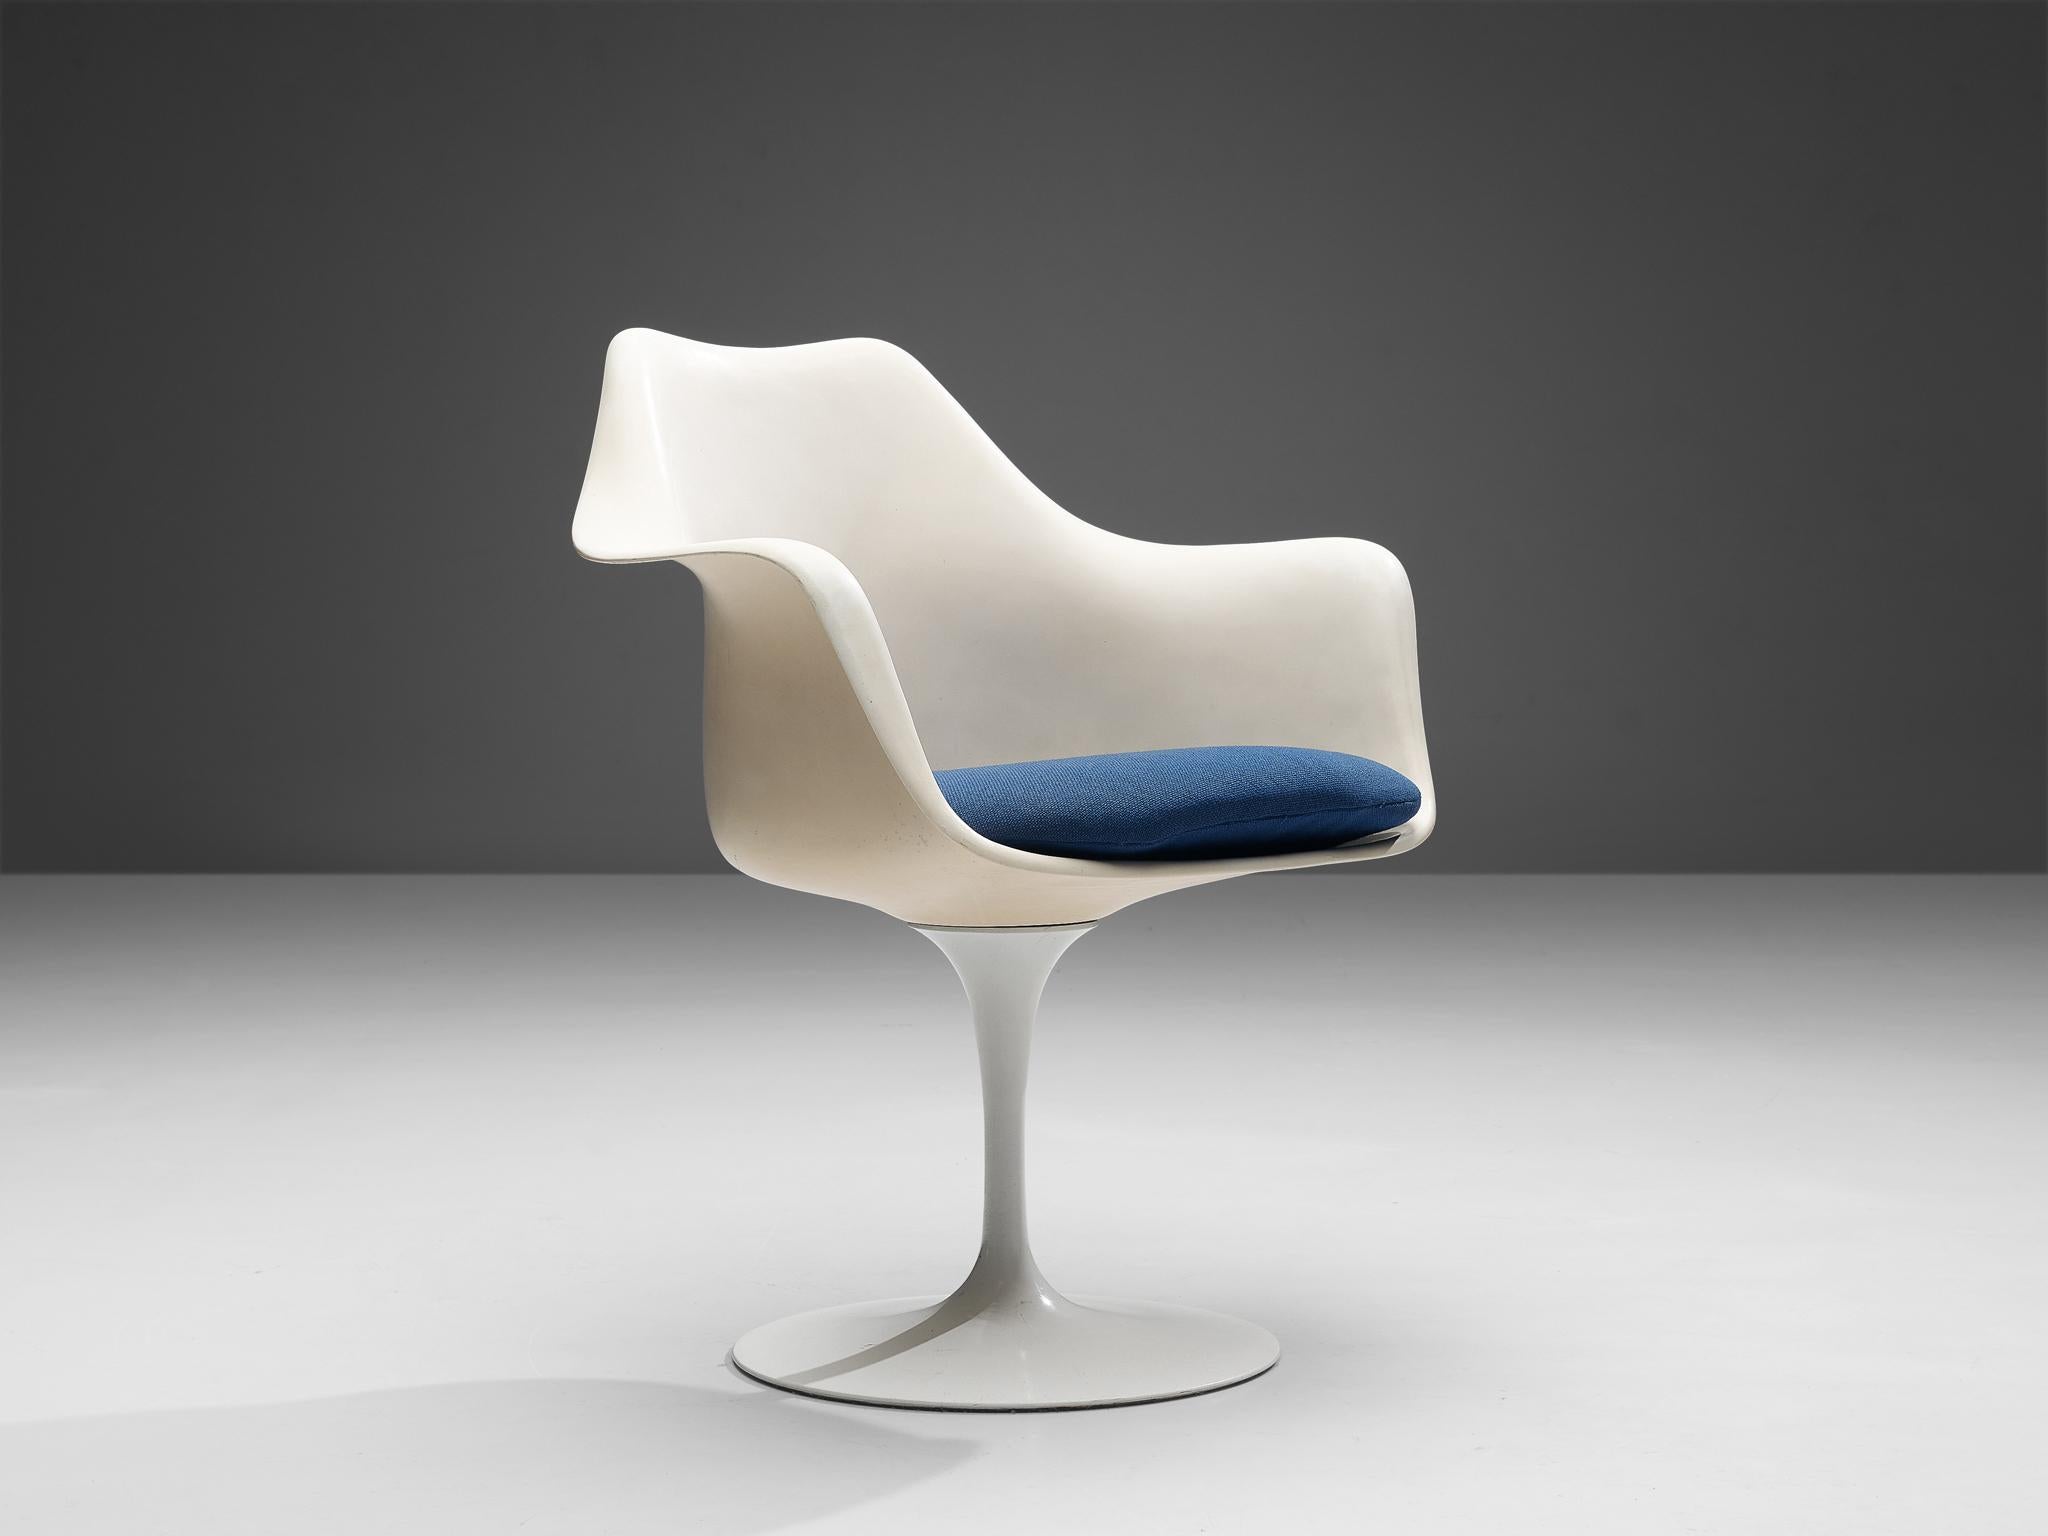 Eero Saarinen for Knoll, 'Tulip' armchair, fiberglass, aluminum and fabric, United States, 1955-56.

This armchair with blue fabric seat is from the 'Tulip' collection and was designed by Eero Saarinen for Knoll International. This iconic tulip